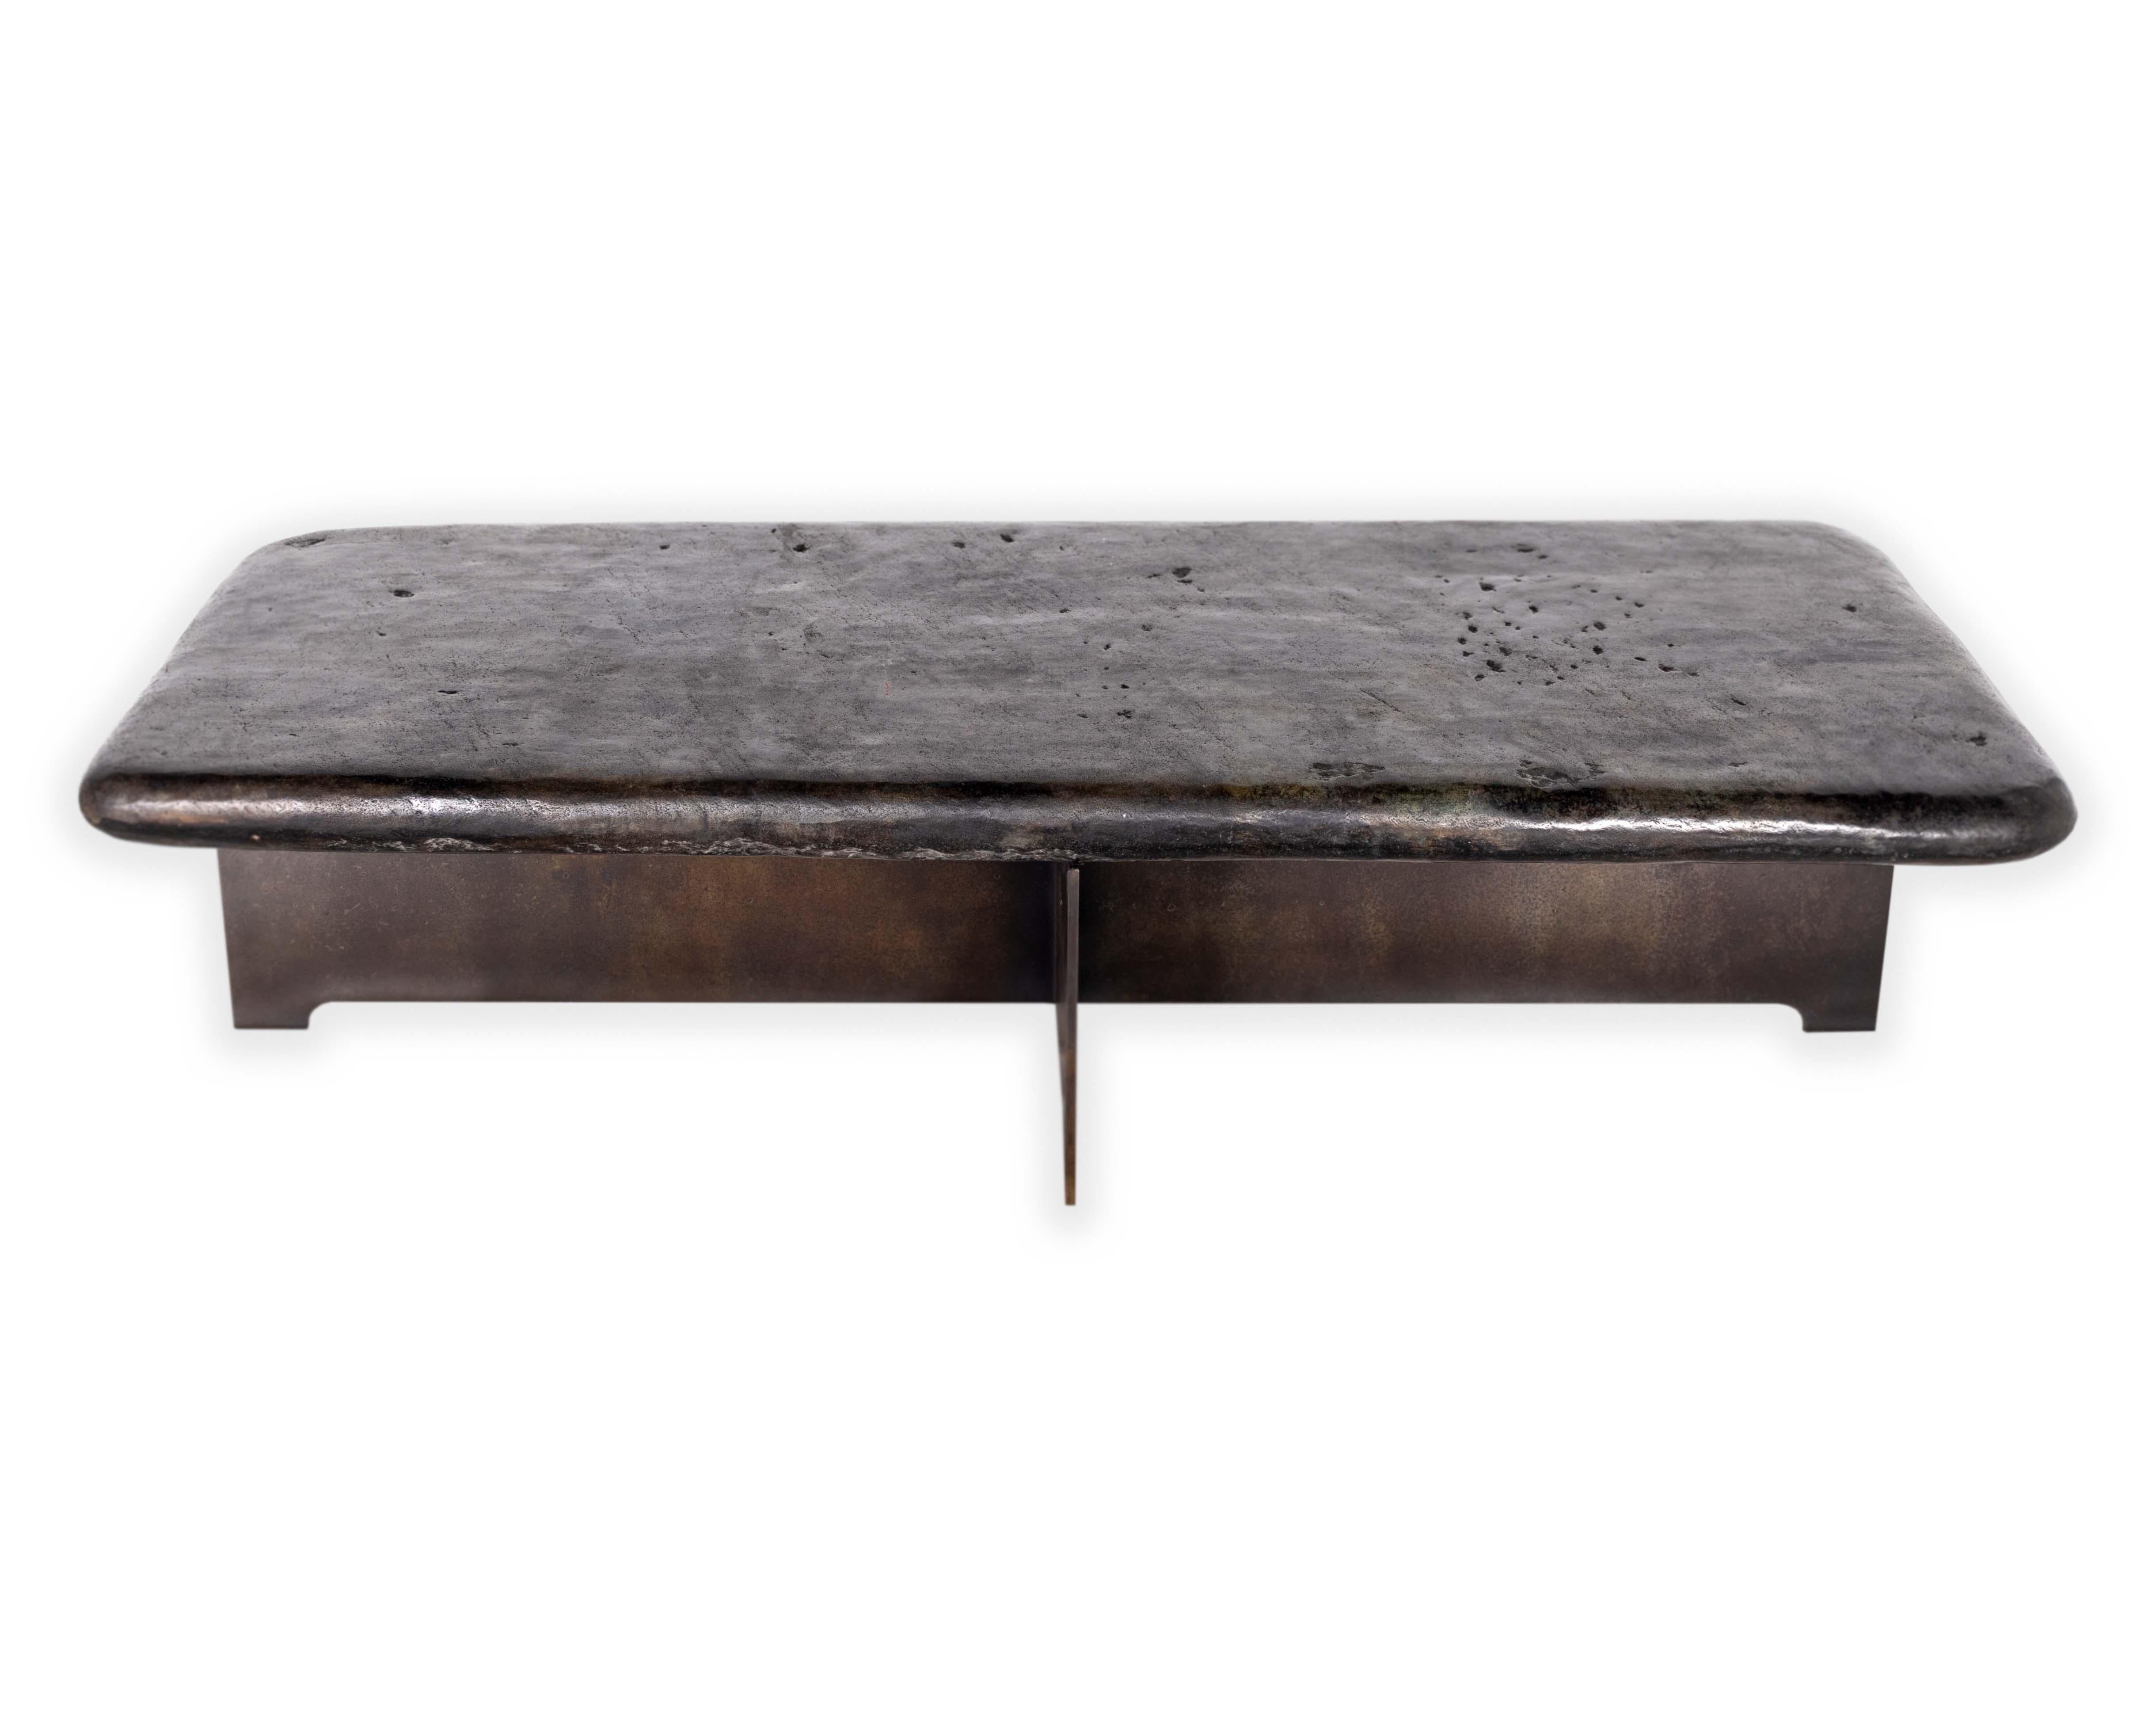 Rustic Balinese Hand Wrought River Stone Coffee Table on Steel Mount